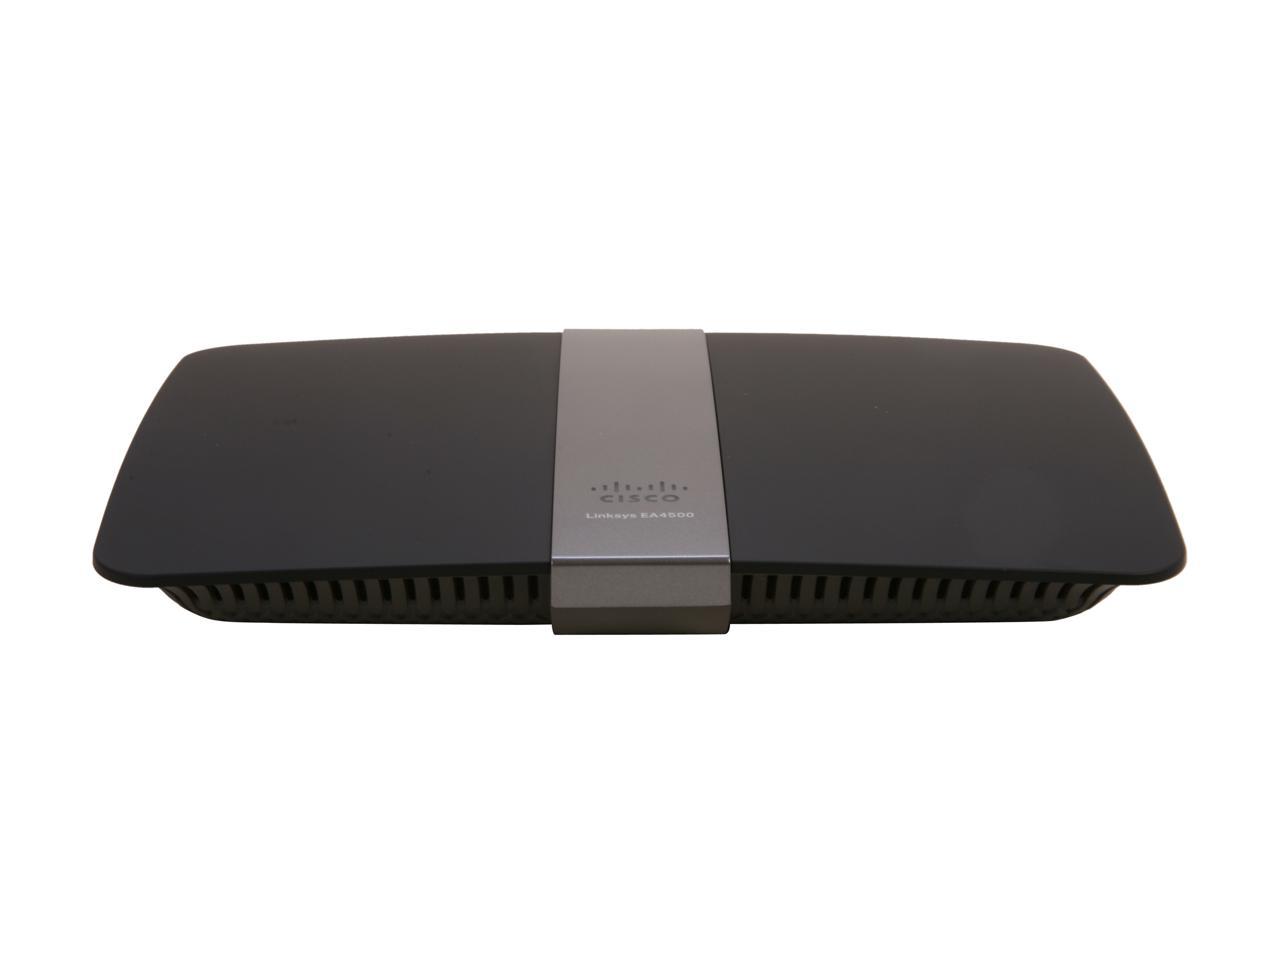 Linksys EA4500 Wireless Router with USB Port 